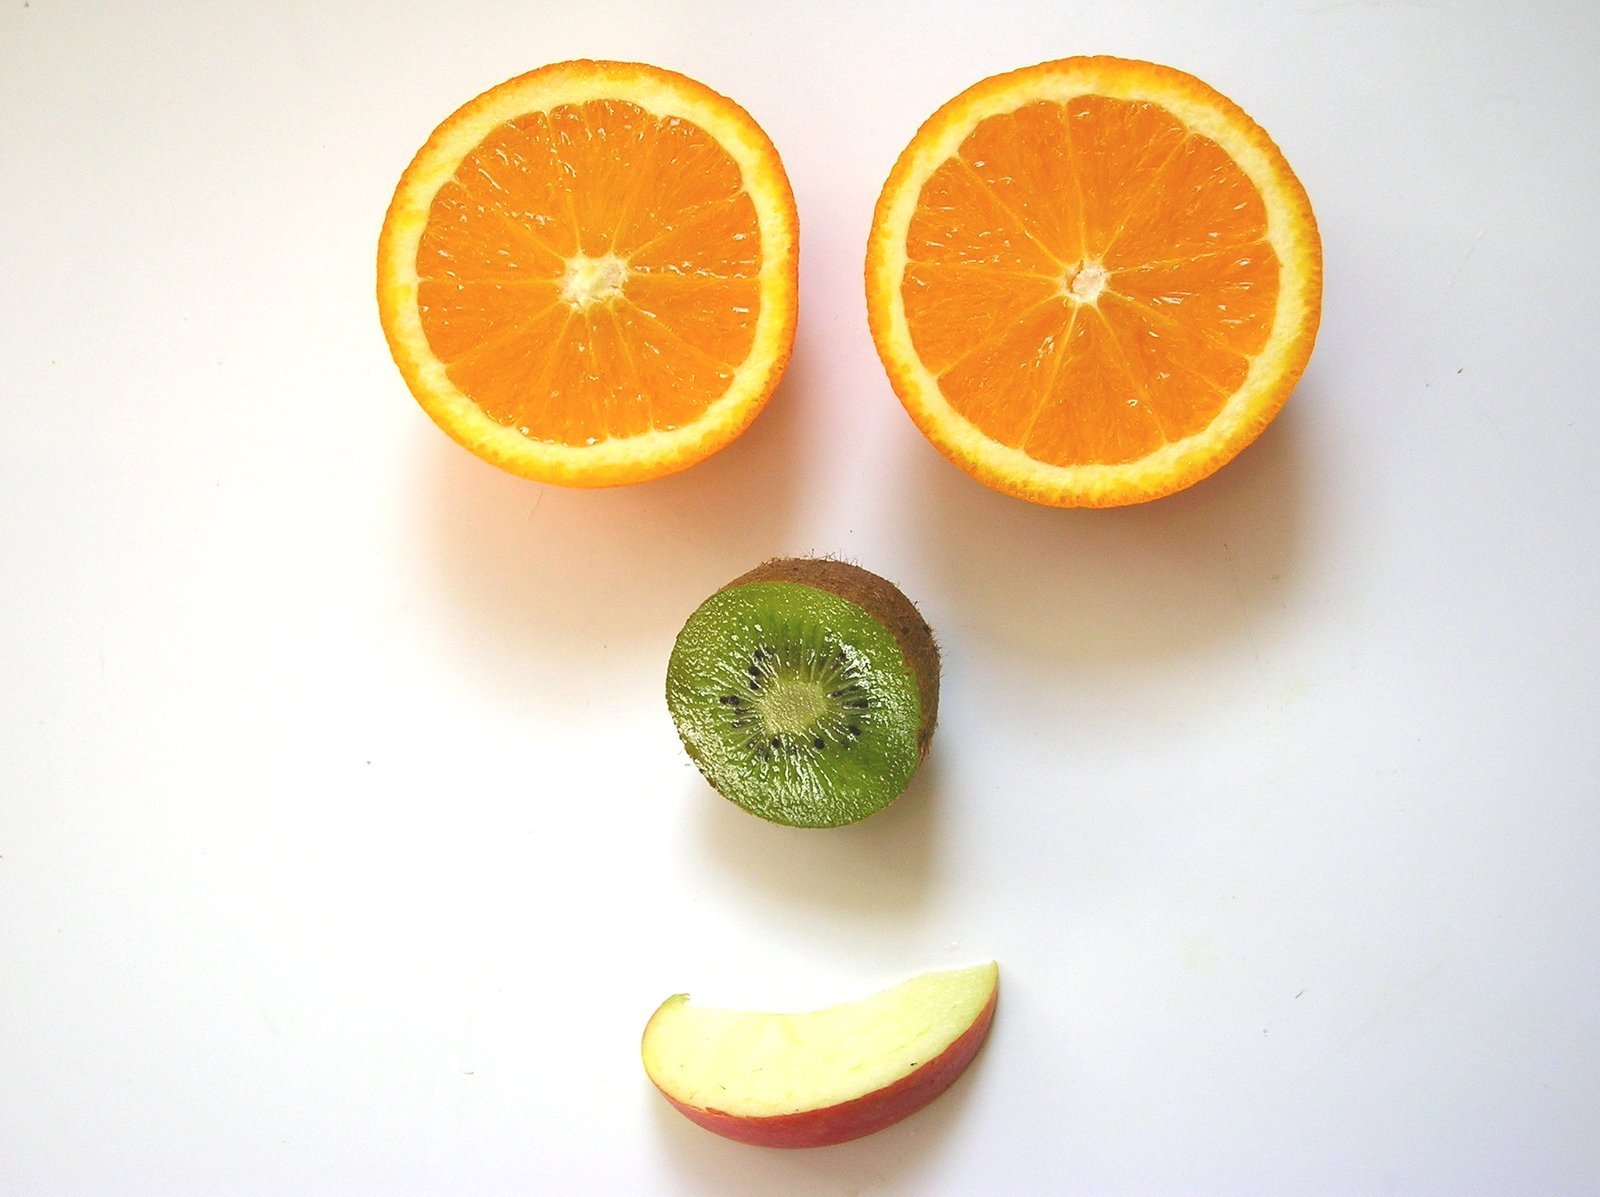 an apple, orange and another piece of fruit are arranged in the shape of a face